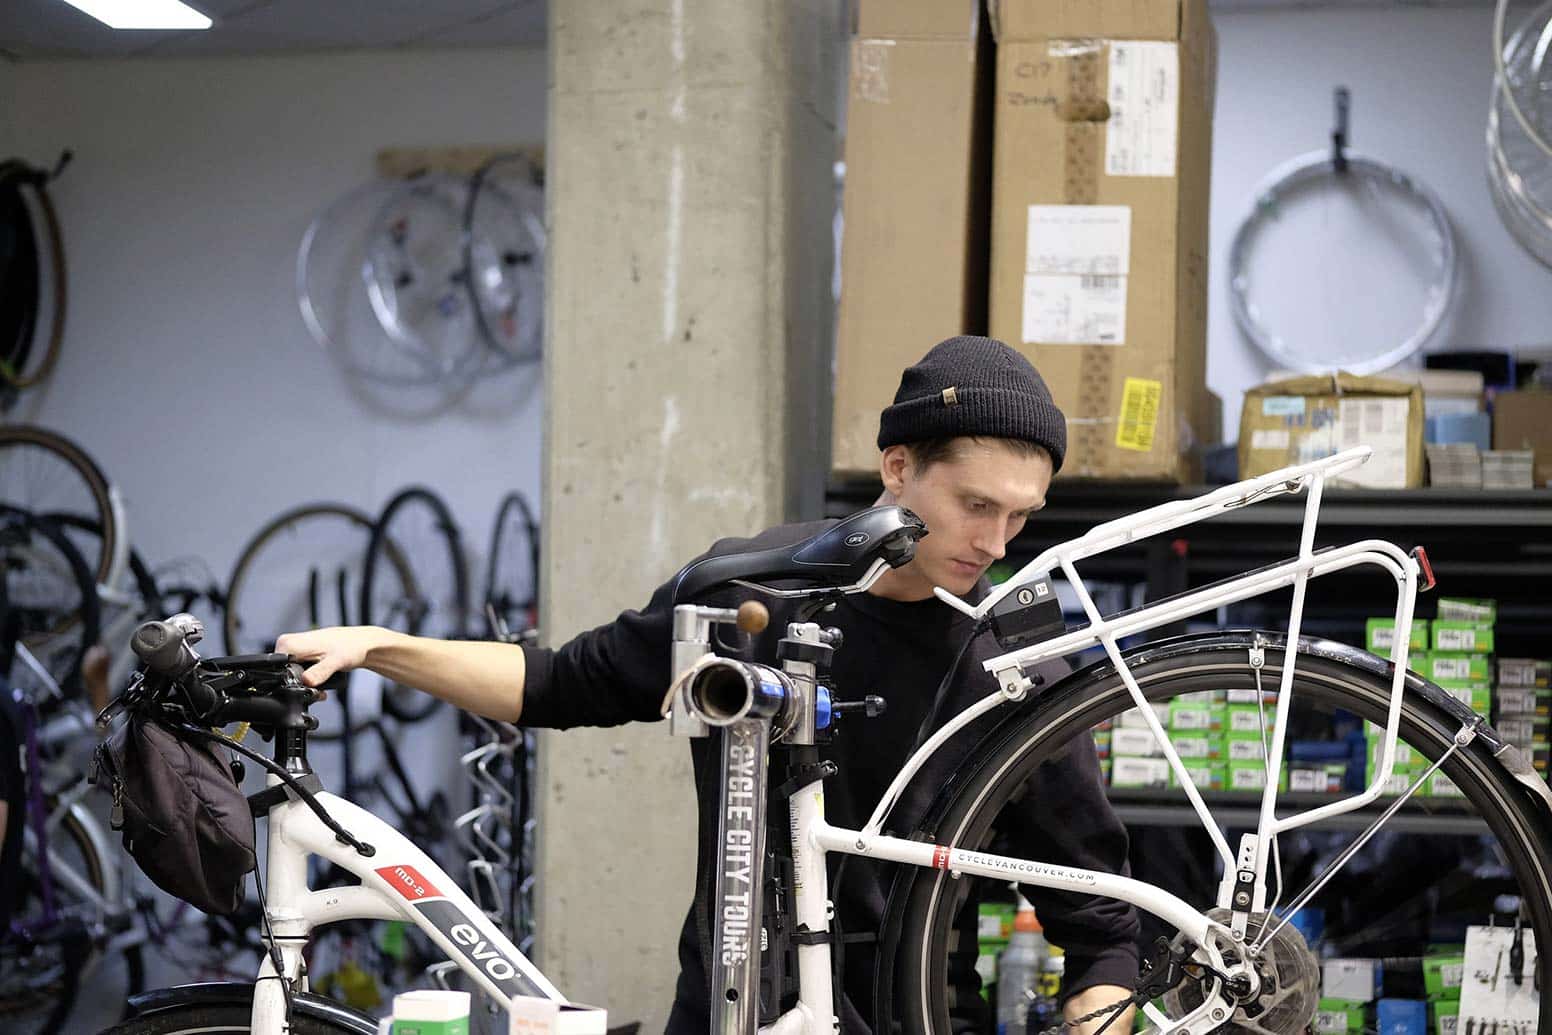 spring cleaning bike tune up